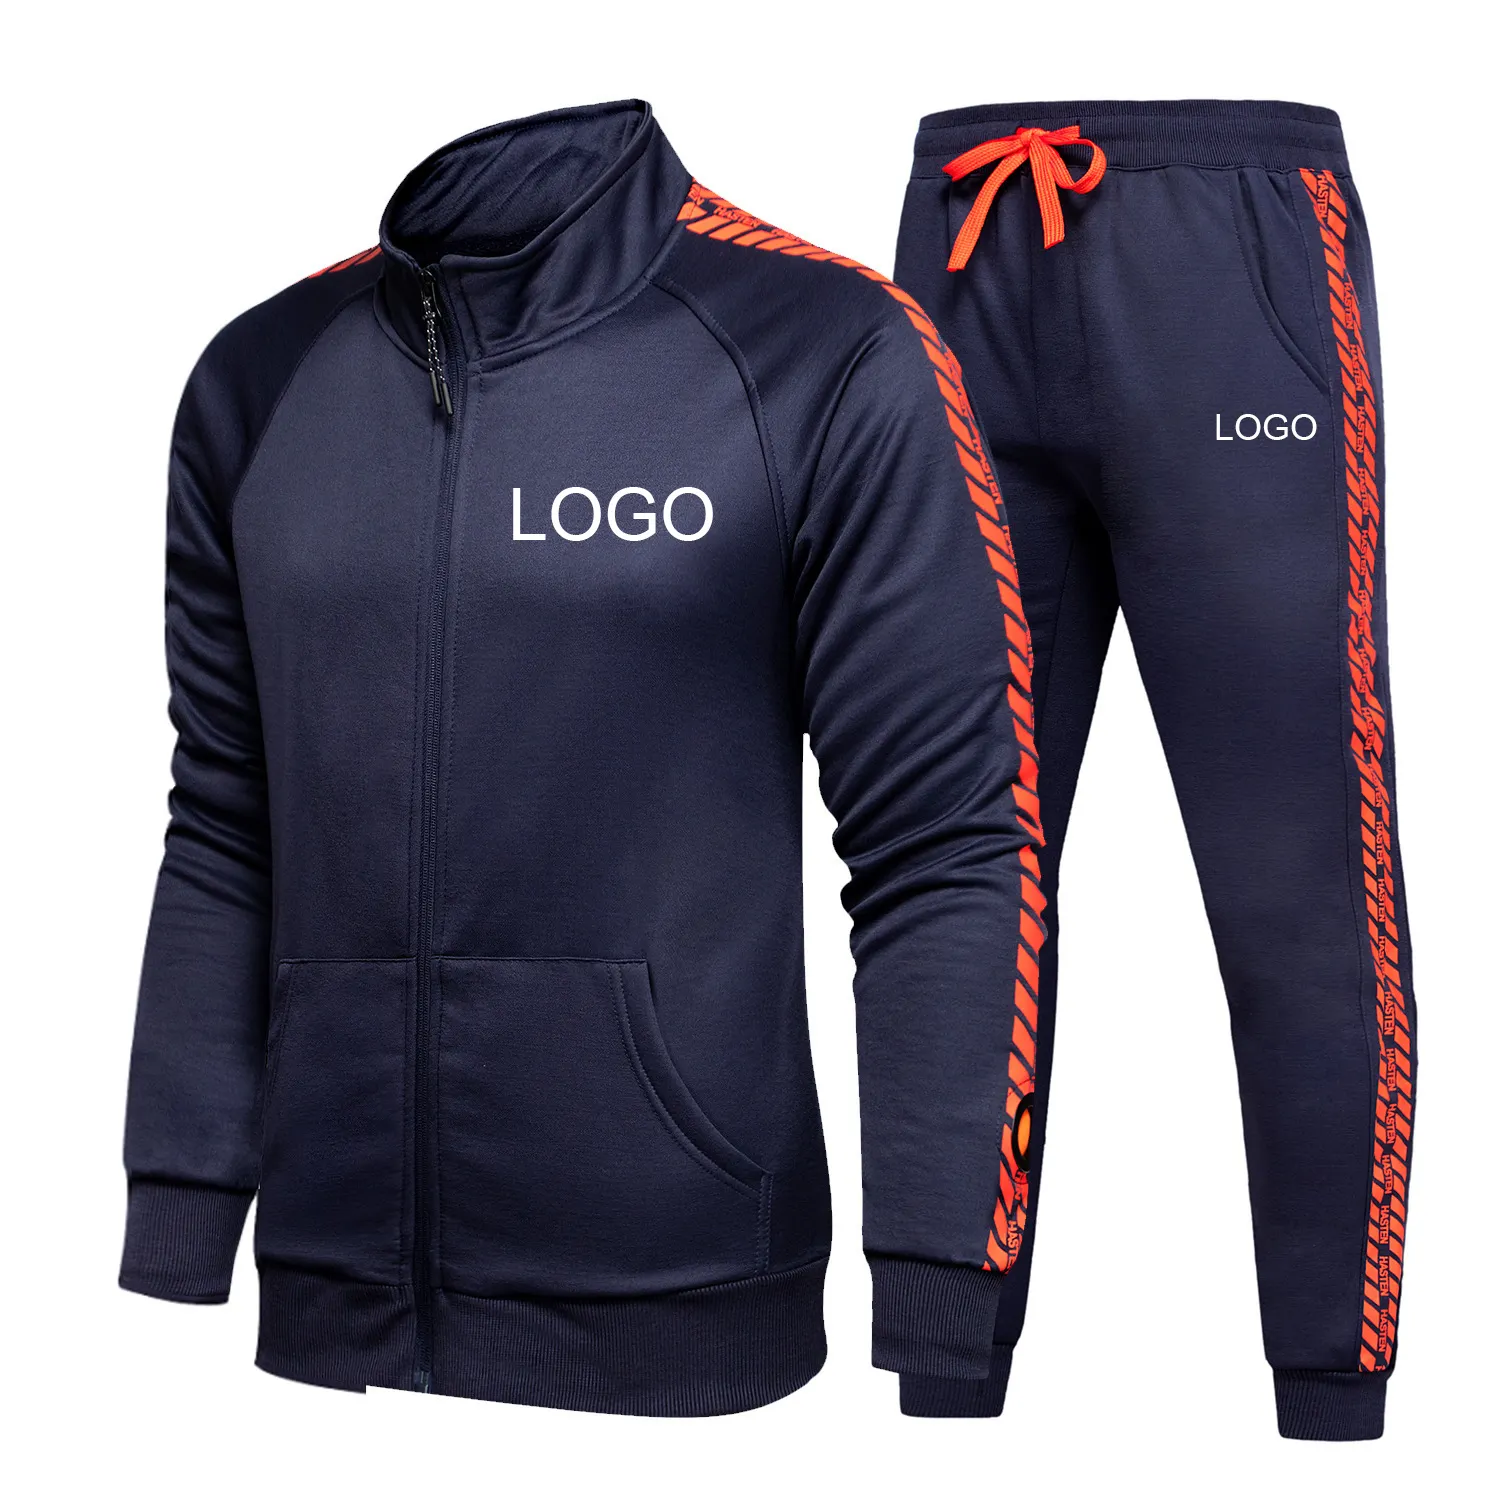 Spring and autumn new sportswear football gym training wear men two-piece set womans arena training loose casual zipper jacket